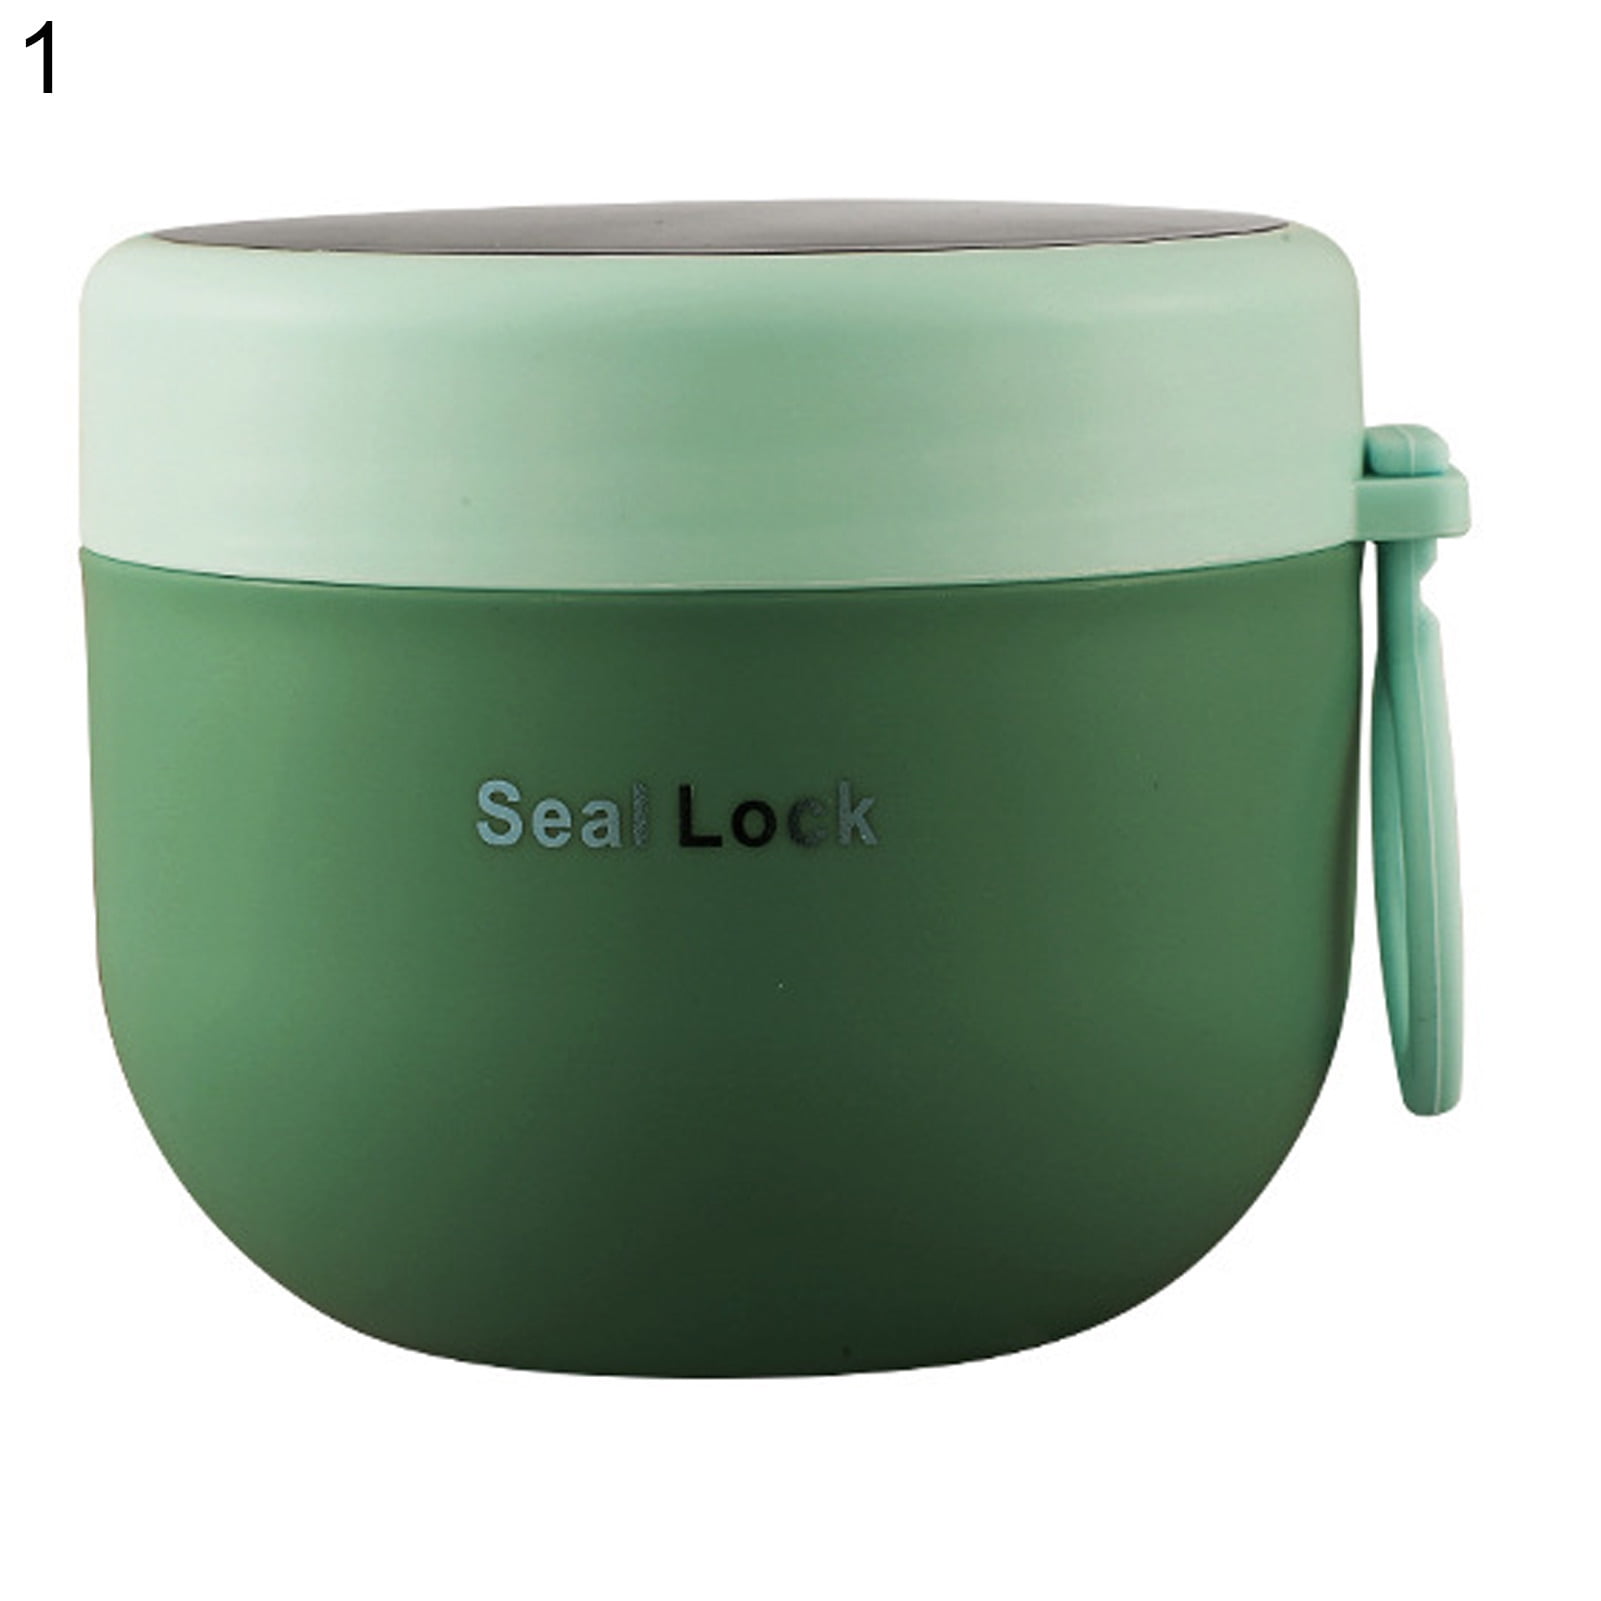 Insulated Food Container Thermo Jar Mug Travel Lunch Box Warmer Cooler Kid Adult, Green